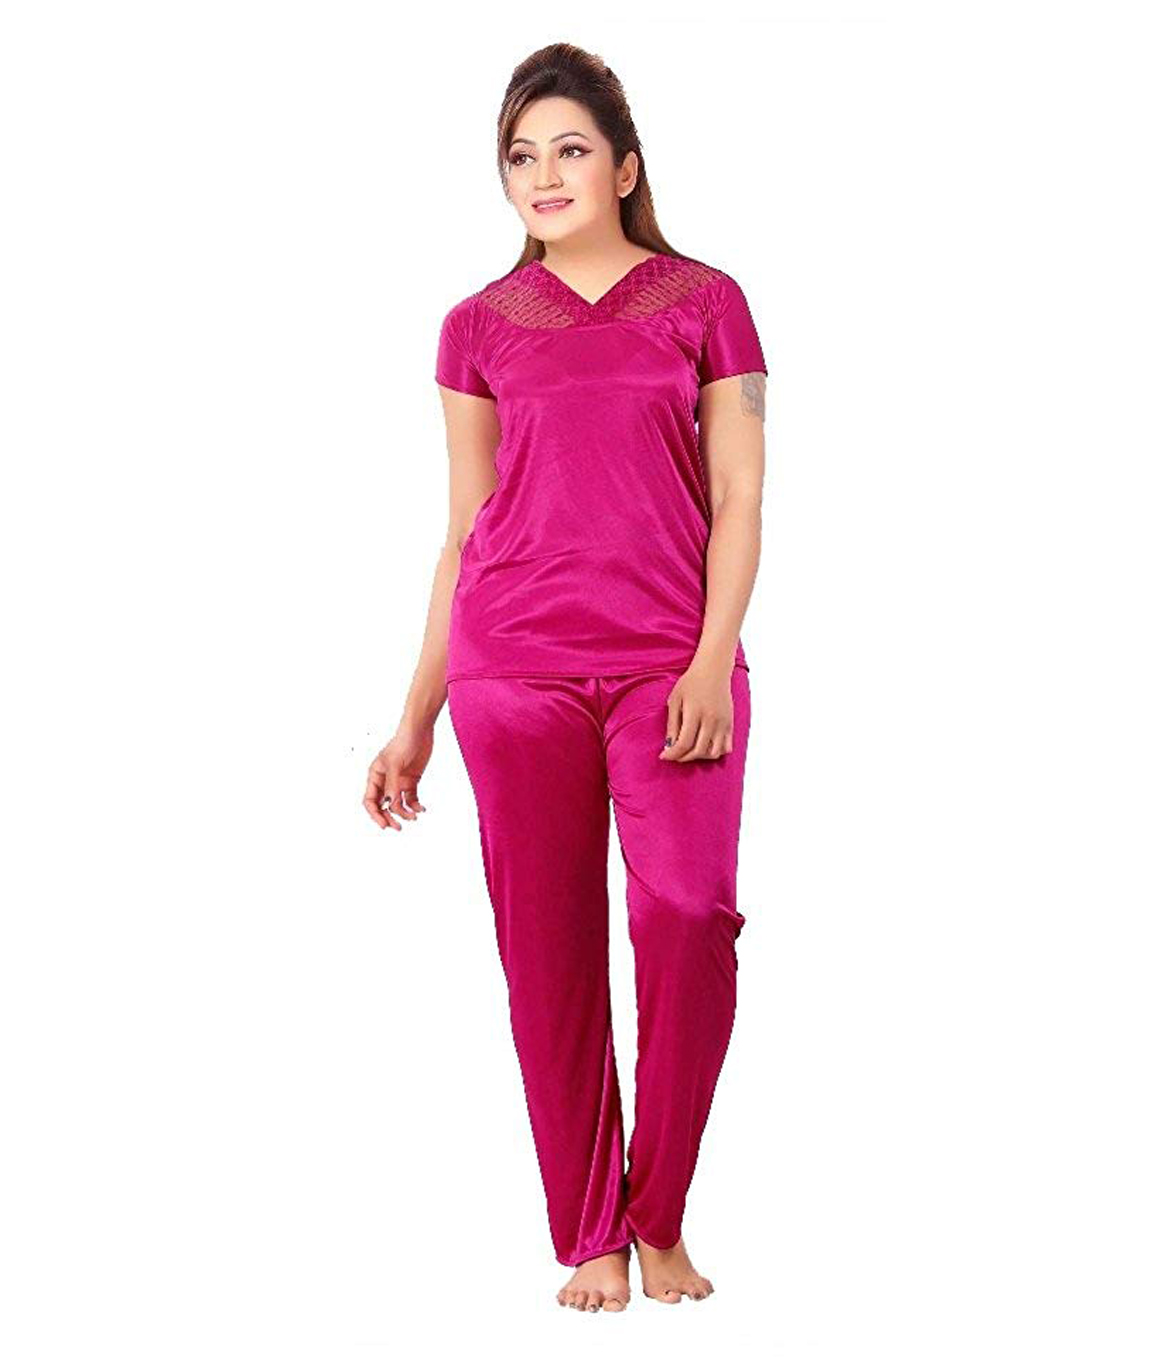 https://www.manthanonline.in/uploadImages/productimage/romaisa-women-s-satin-nighty-wrap-gown-top-pajama-bra-and-thong-free-size-pack-of-6-colour-magenta-z3.jpg